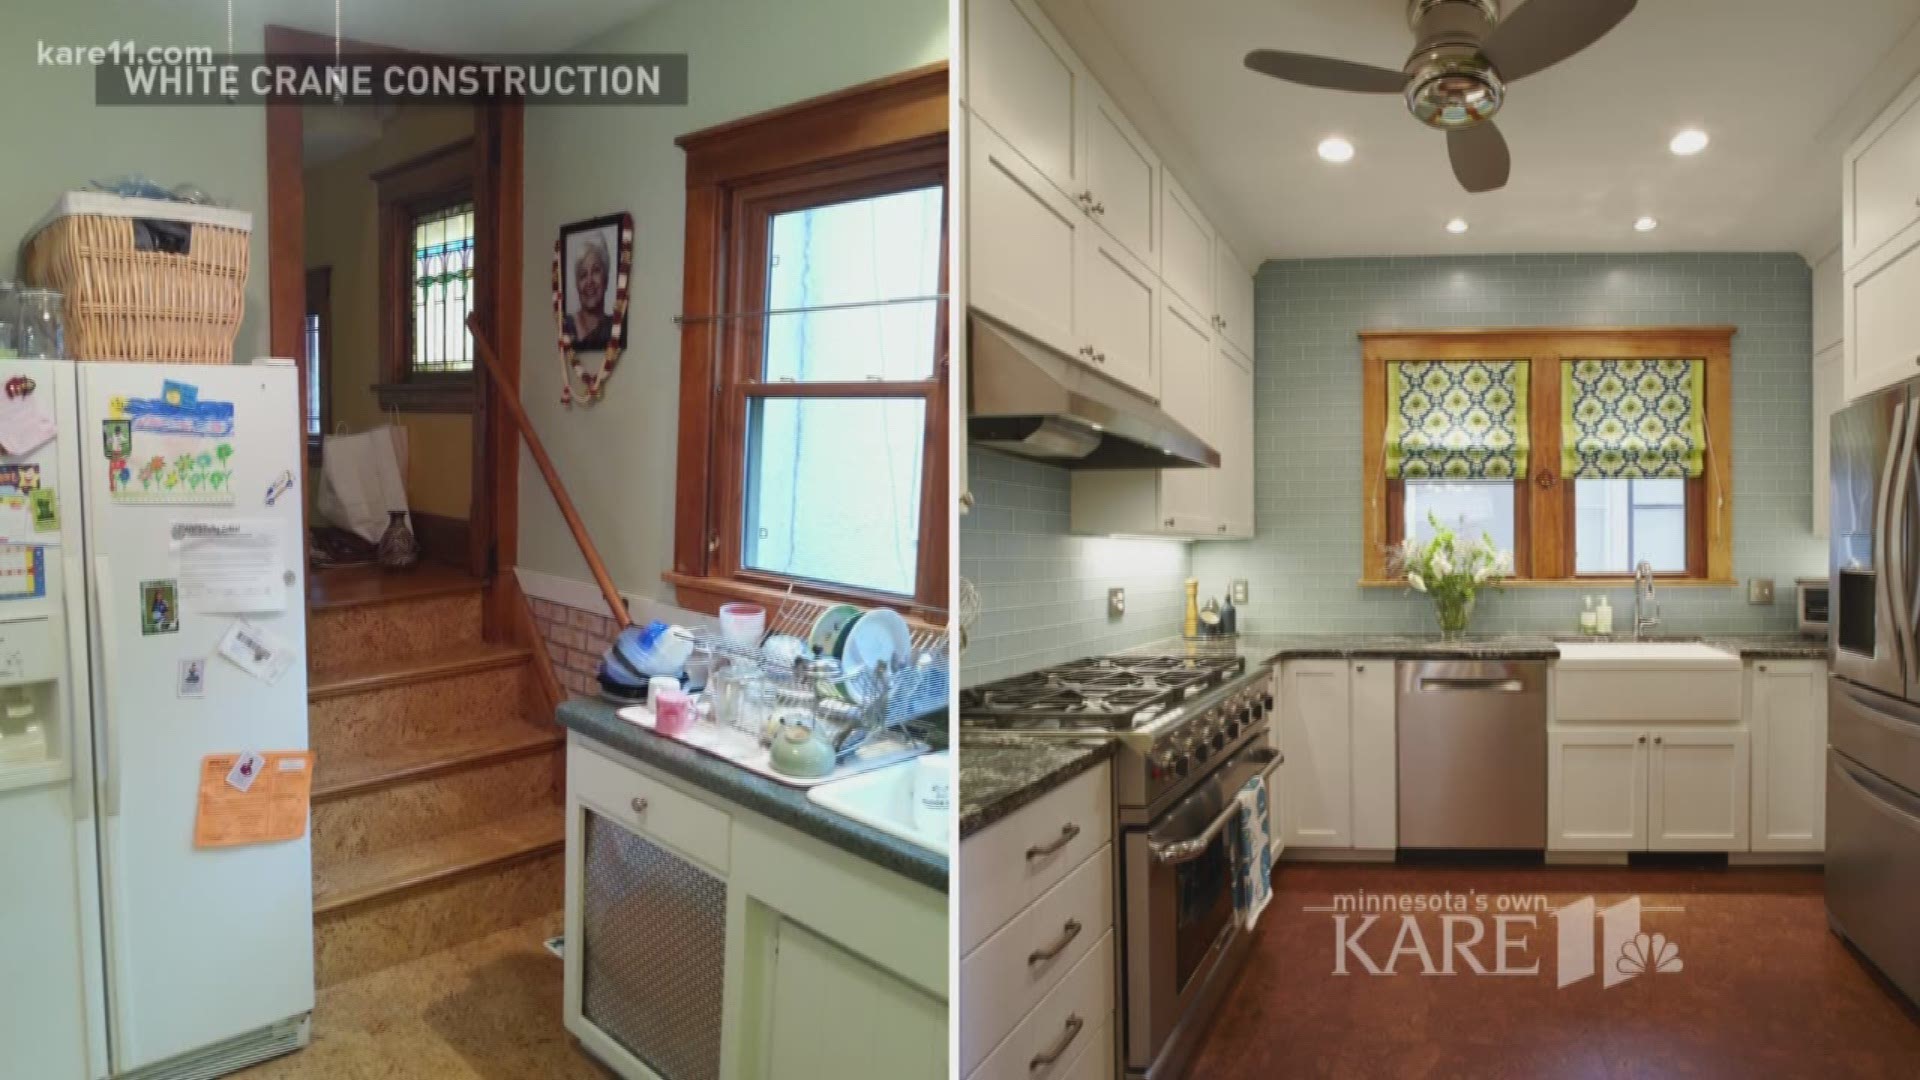 Katie Jaydan, Senior designer with White Crane Construction, talked about some remodeling projects for overcoming common older home hurdles.